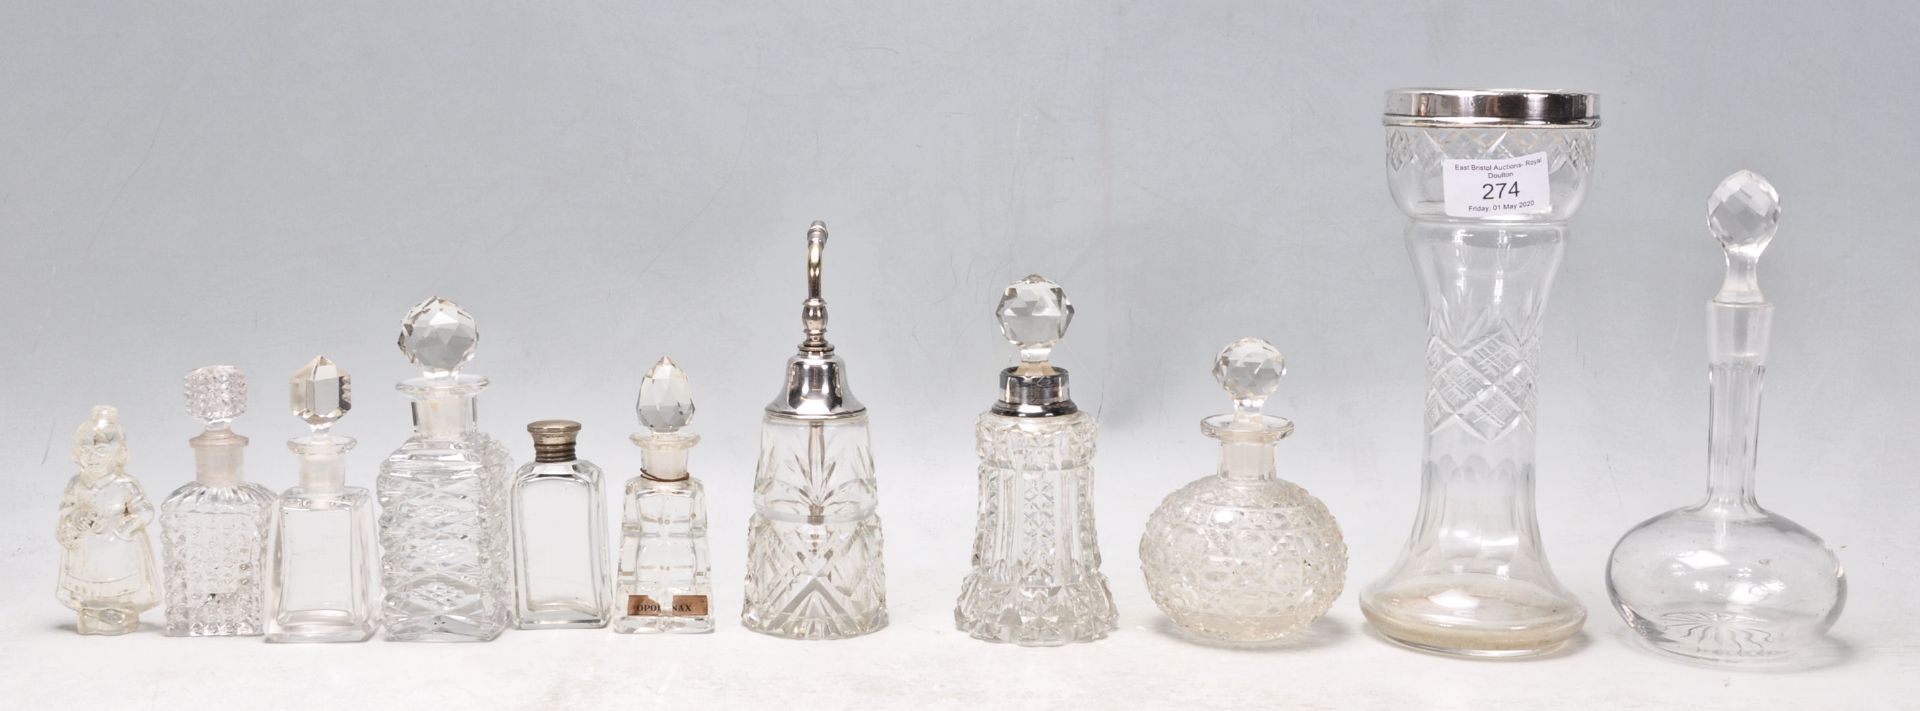 A collection of antique and vintage cut glass perfume / scent bottles to include a 1920's Art Deco